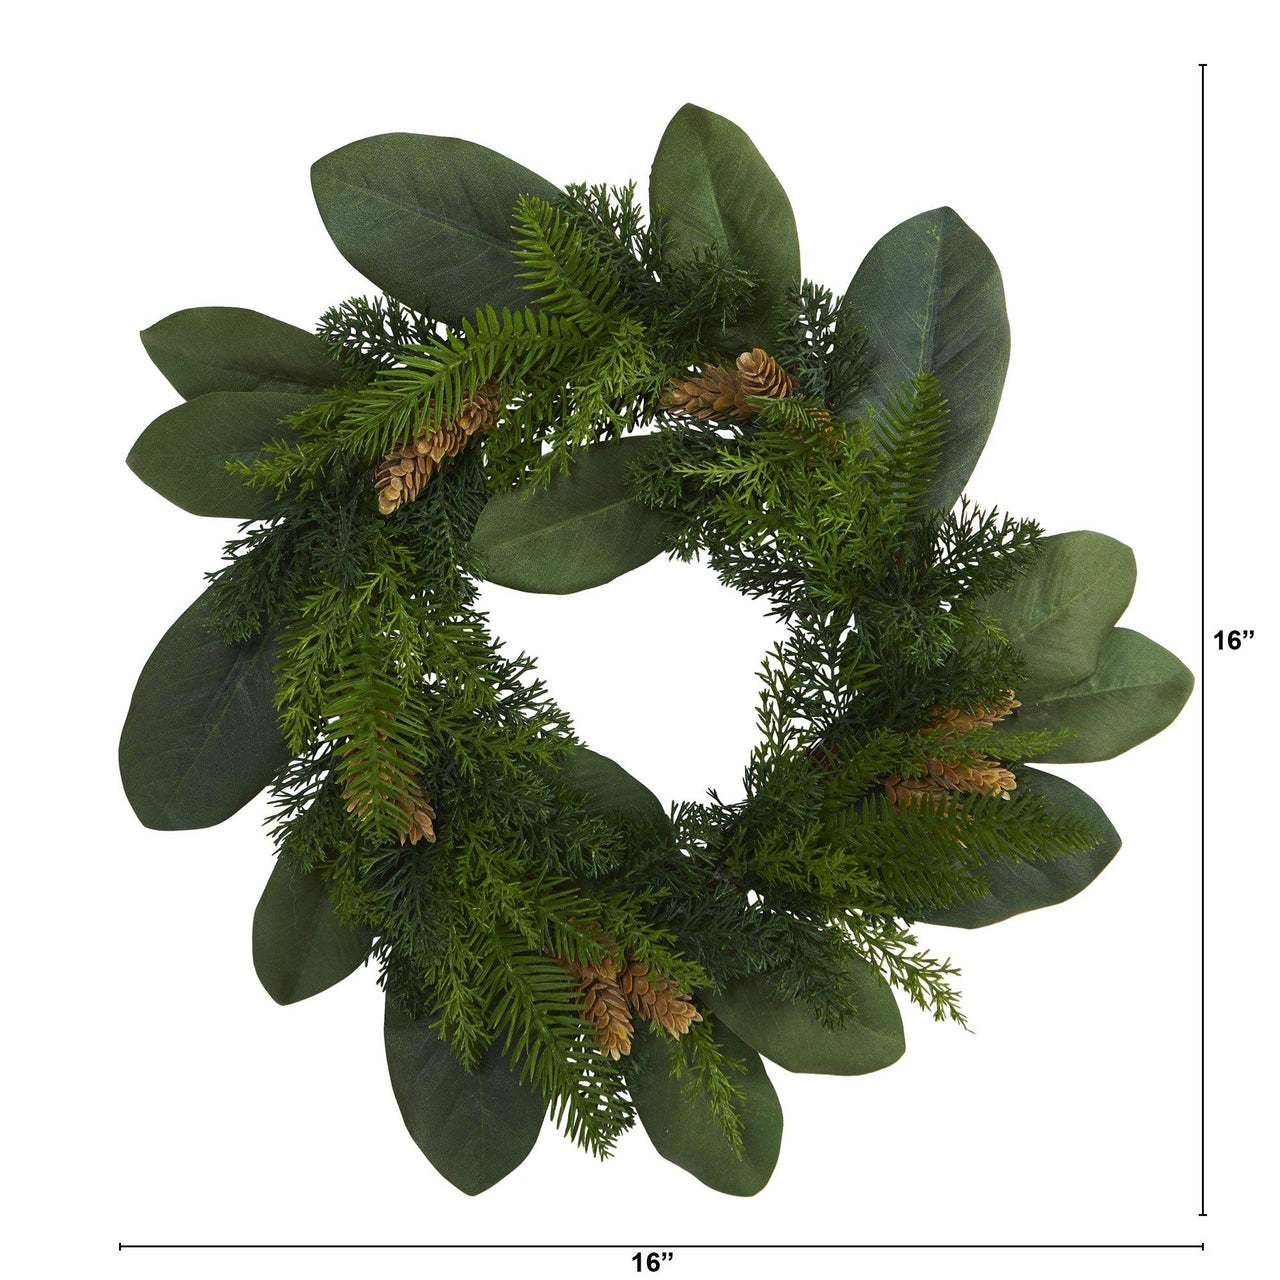 16” Magnolia Leaf and Mixed Pine Artificial Wreath with Pine Cones - The Fox Decor